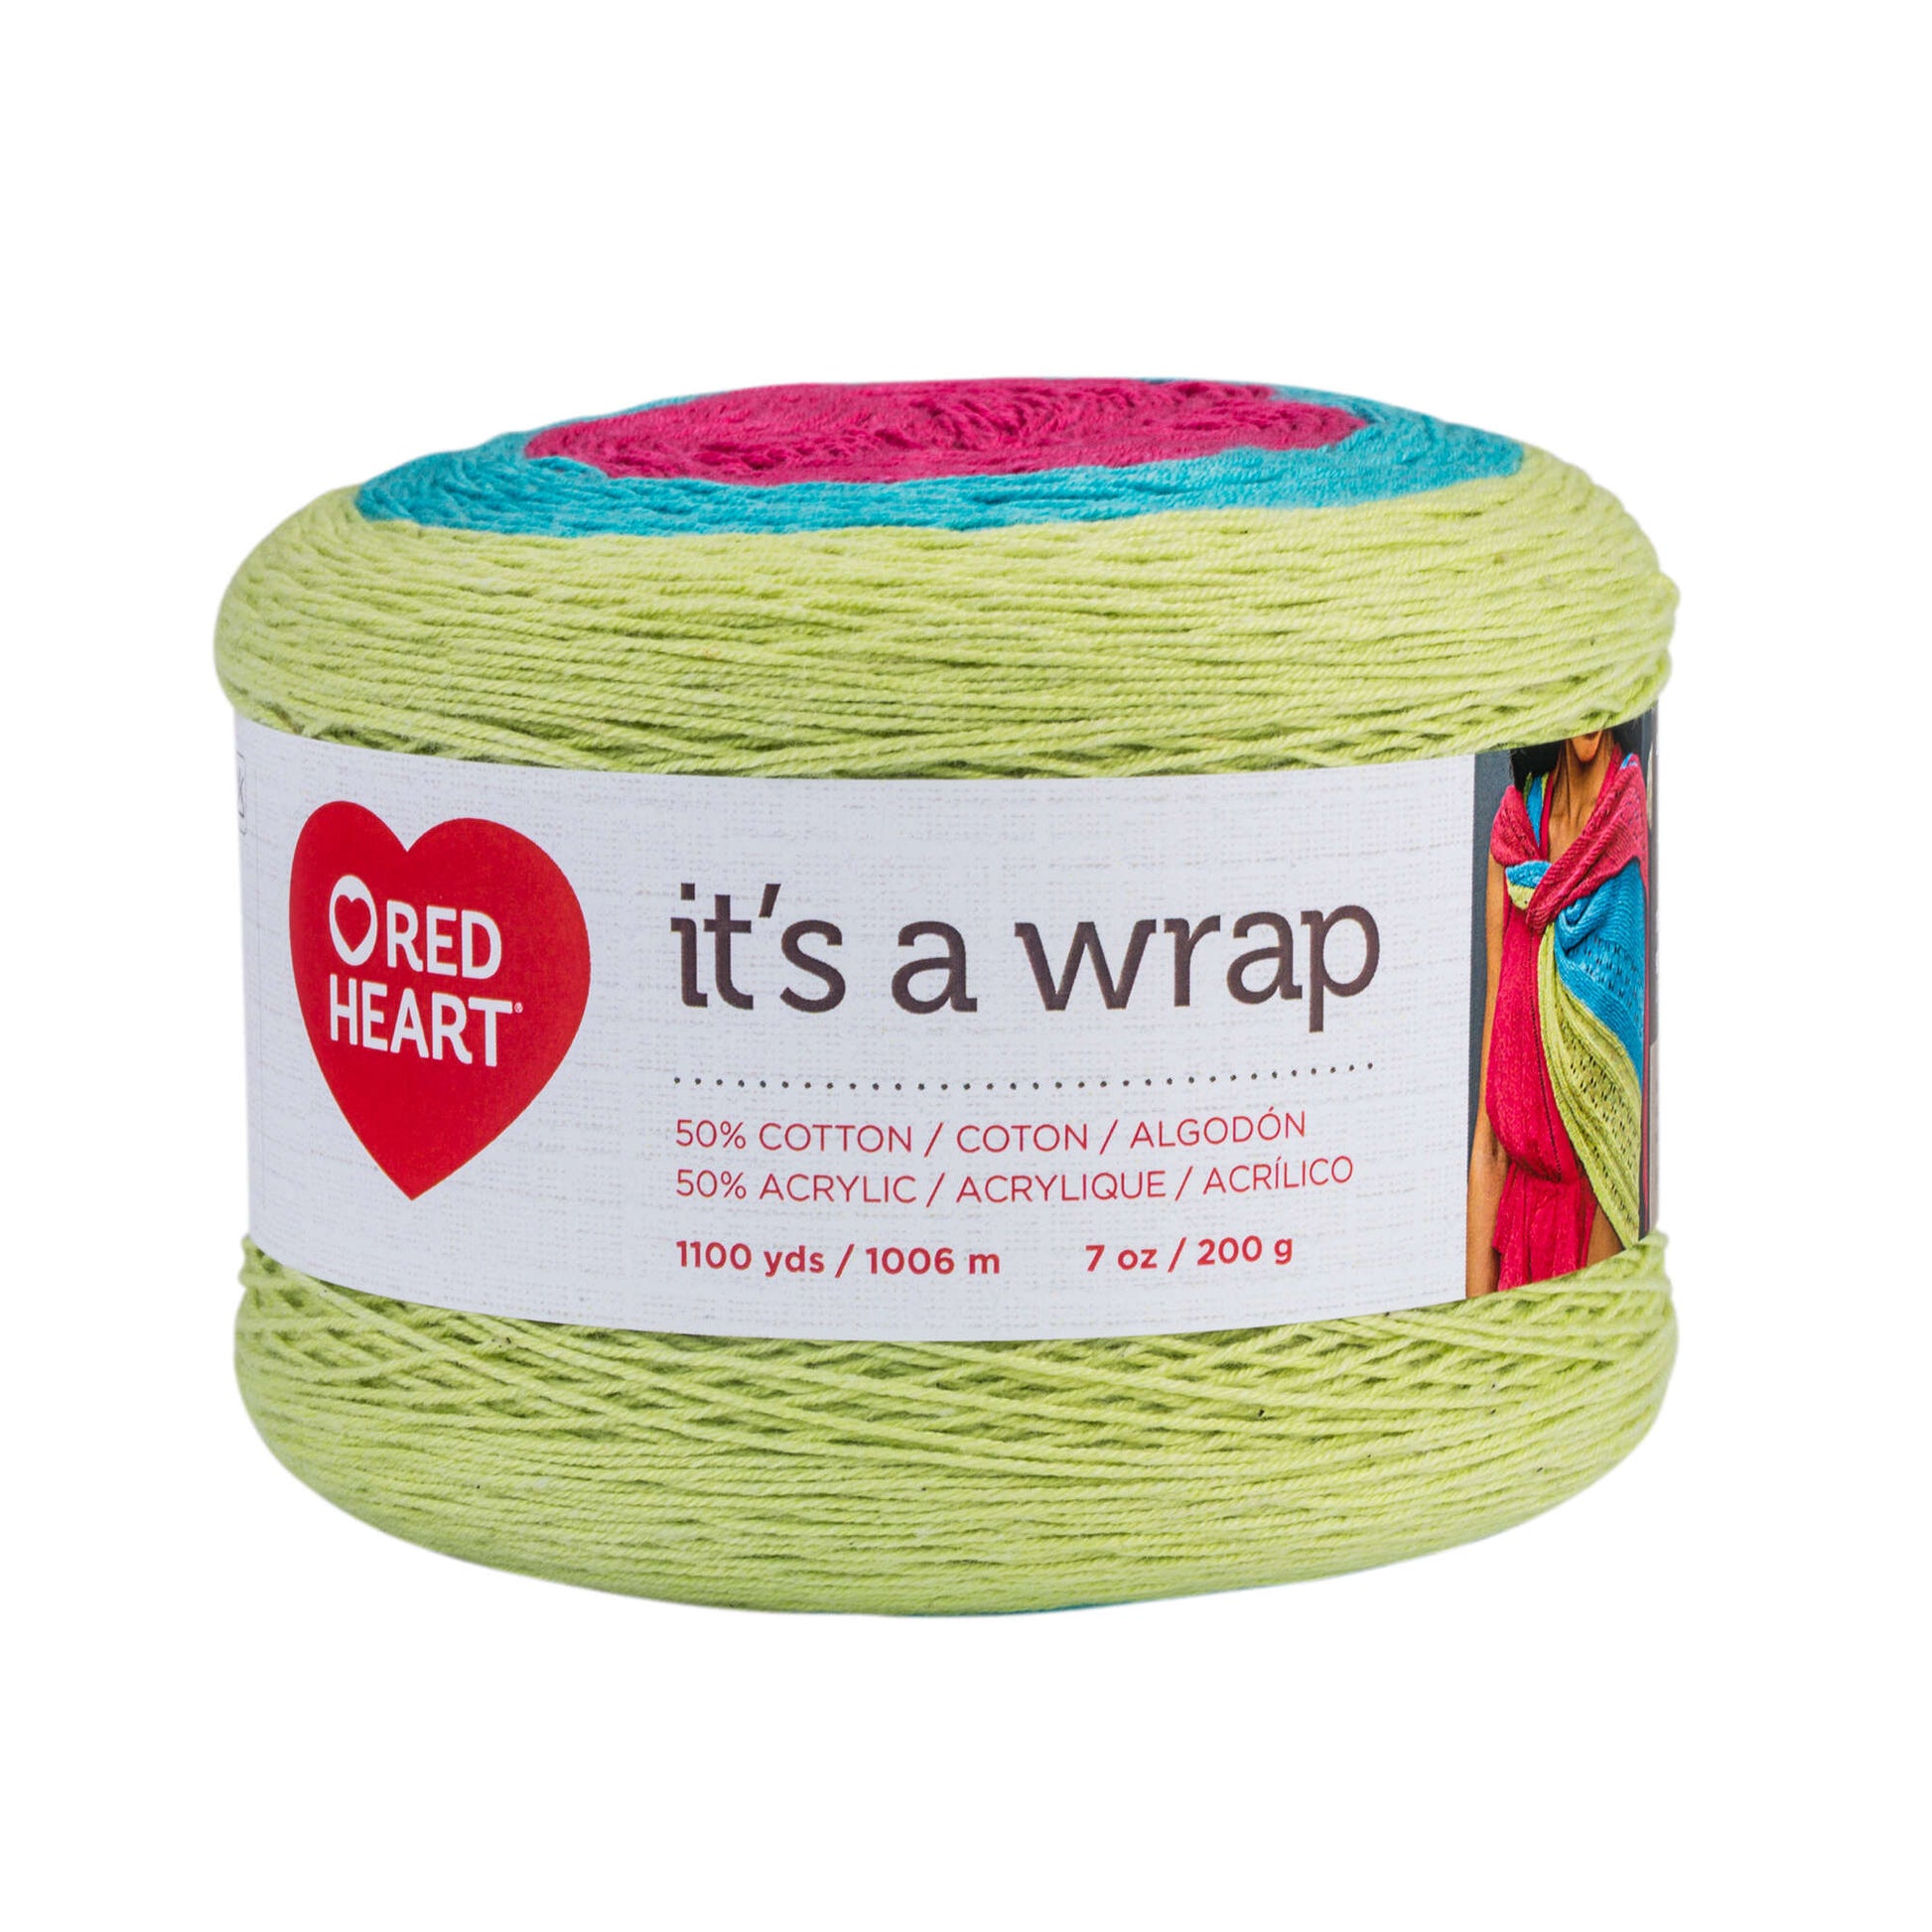 Red Heart It's a Wrap Yarn - Clearance shades